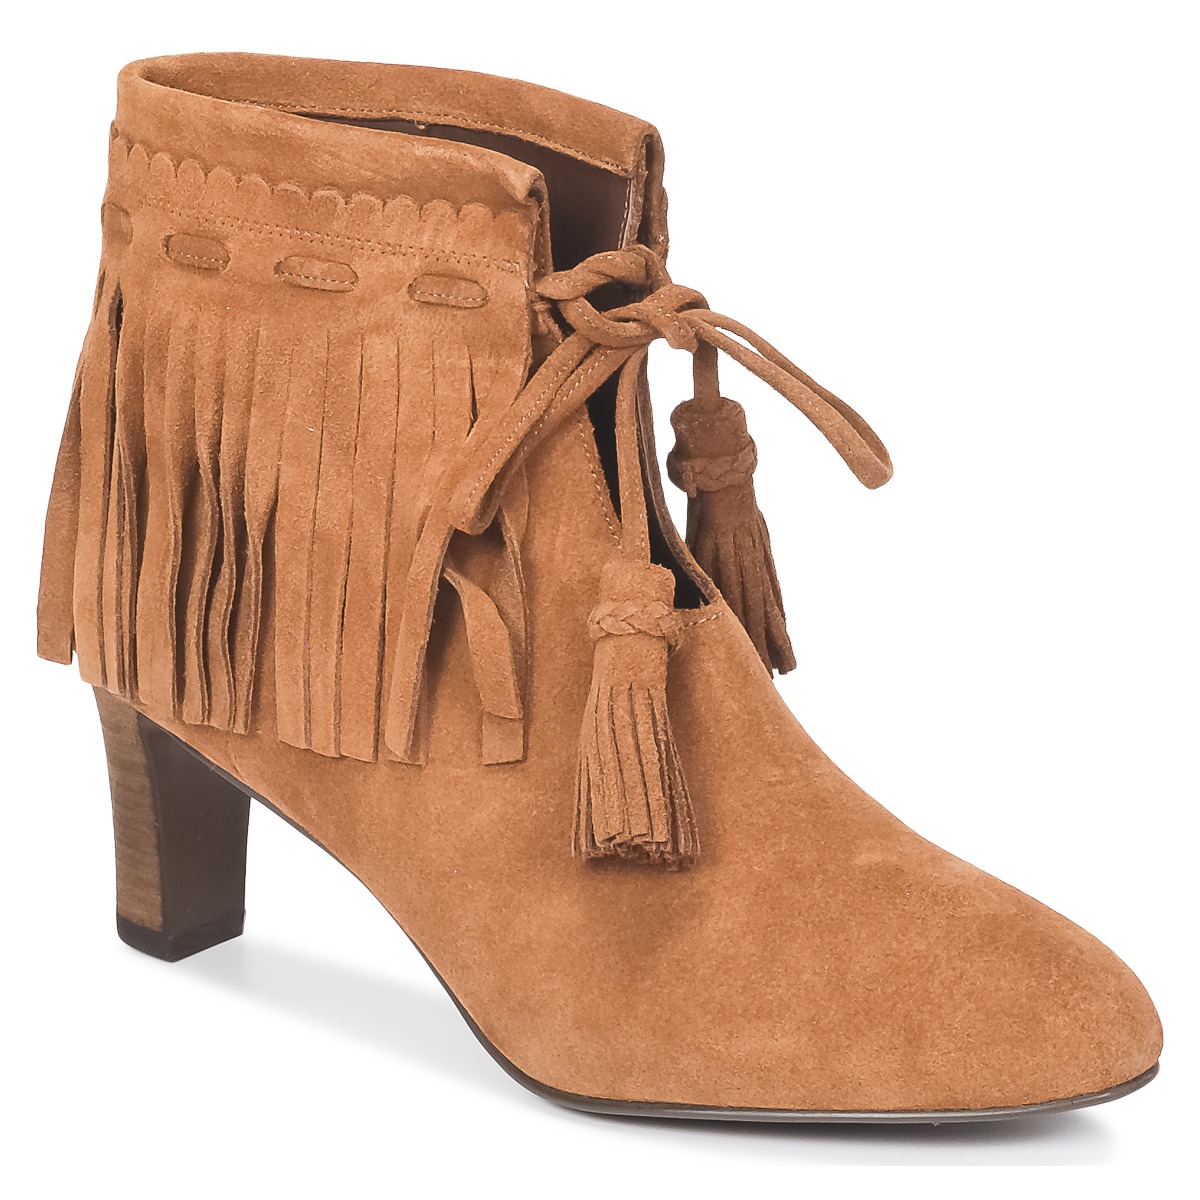 Zapatos Mujer Botines See by Chloé FLARIL Cognac